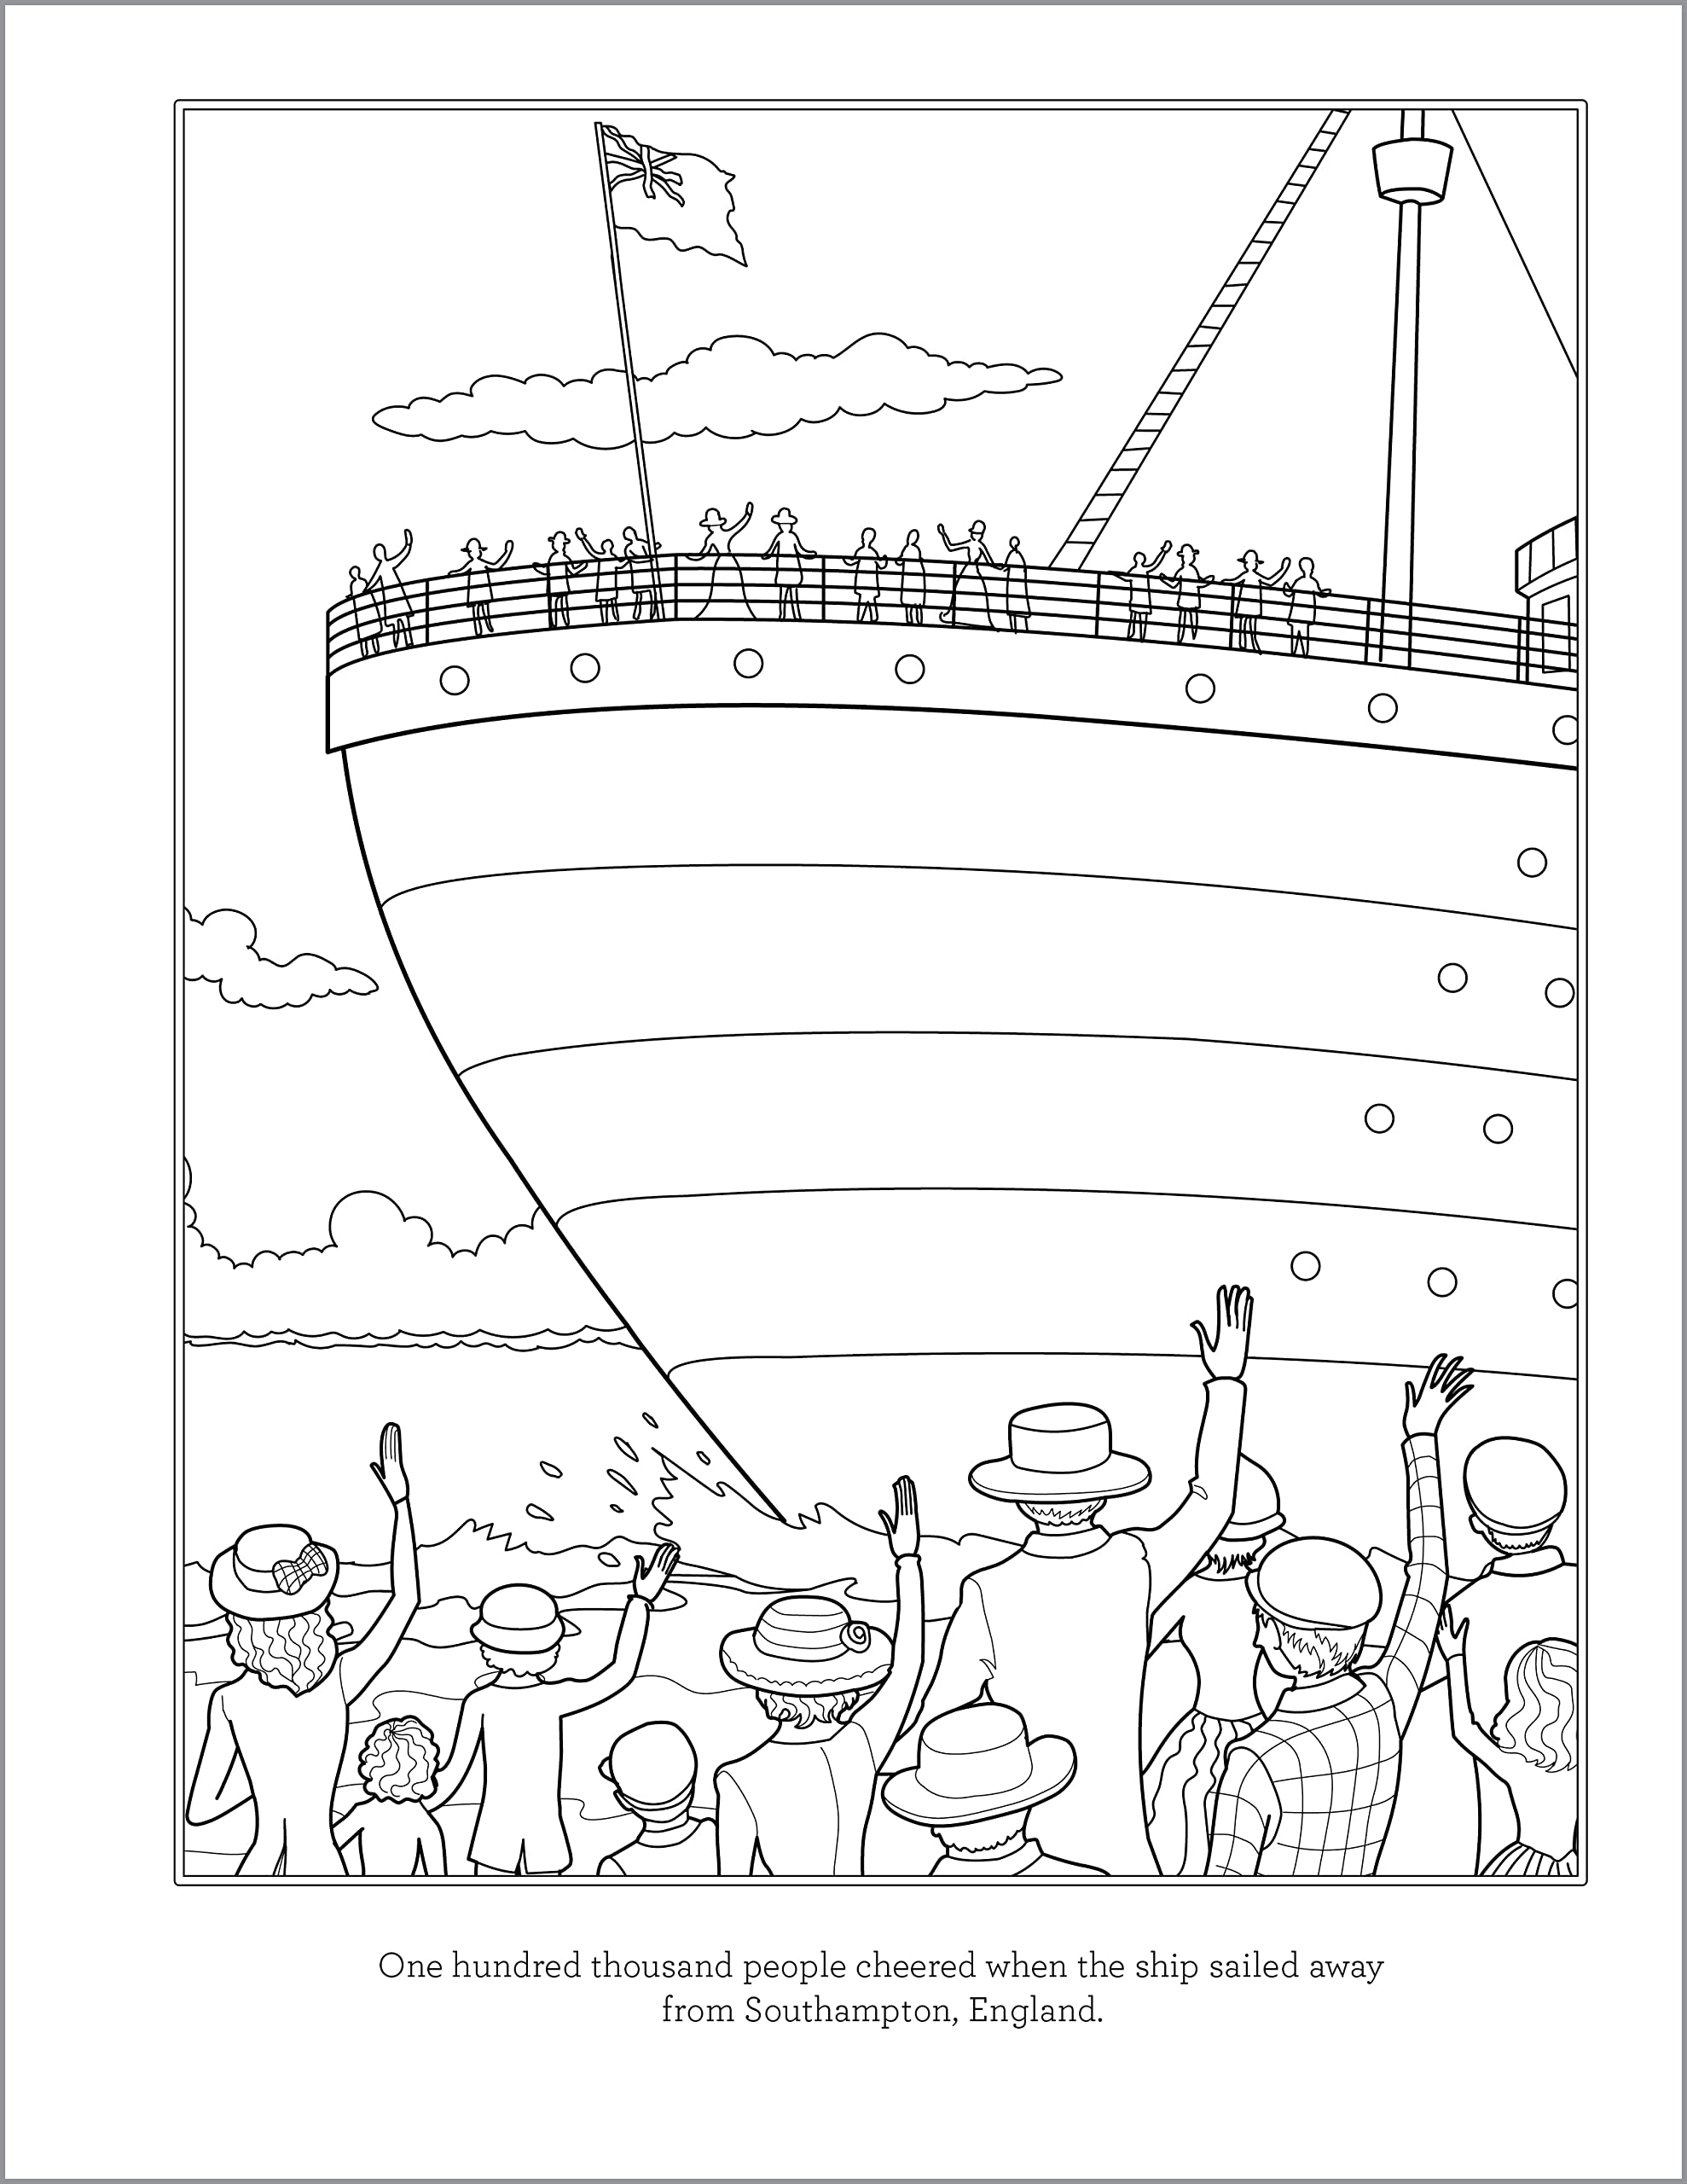 Titanic Coloring Book for Kids: 30 Coloring Activities to Learn About the Titanic